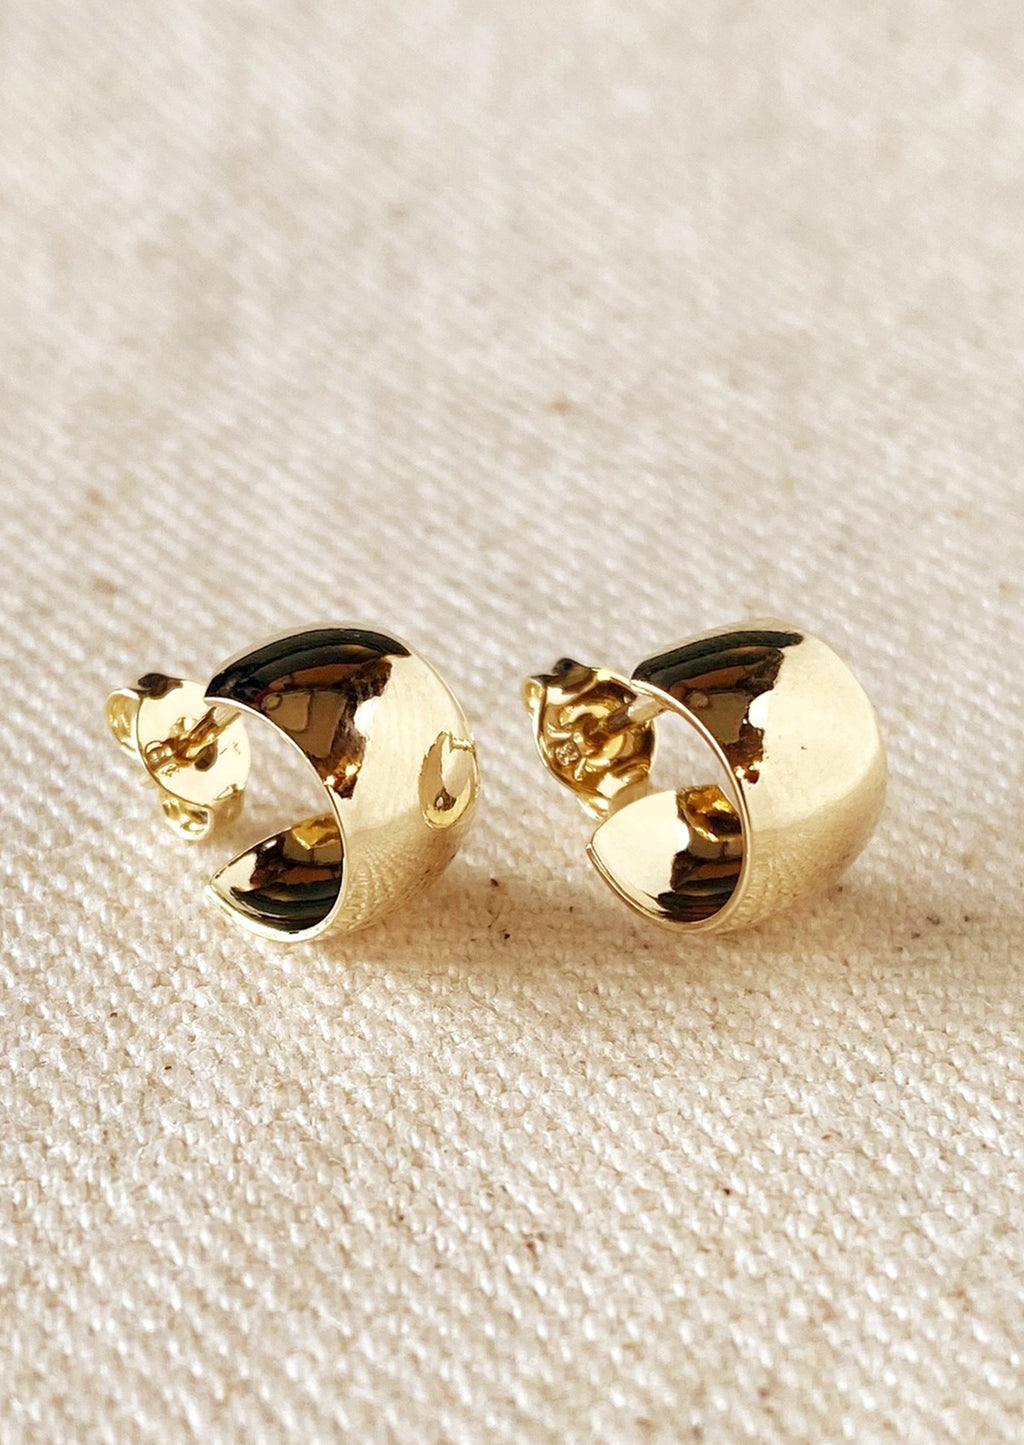 1: A pair of wide and thick chunky mini hoop earrings with post back in gold.